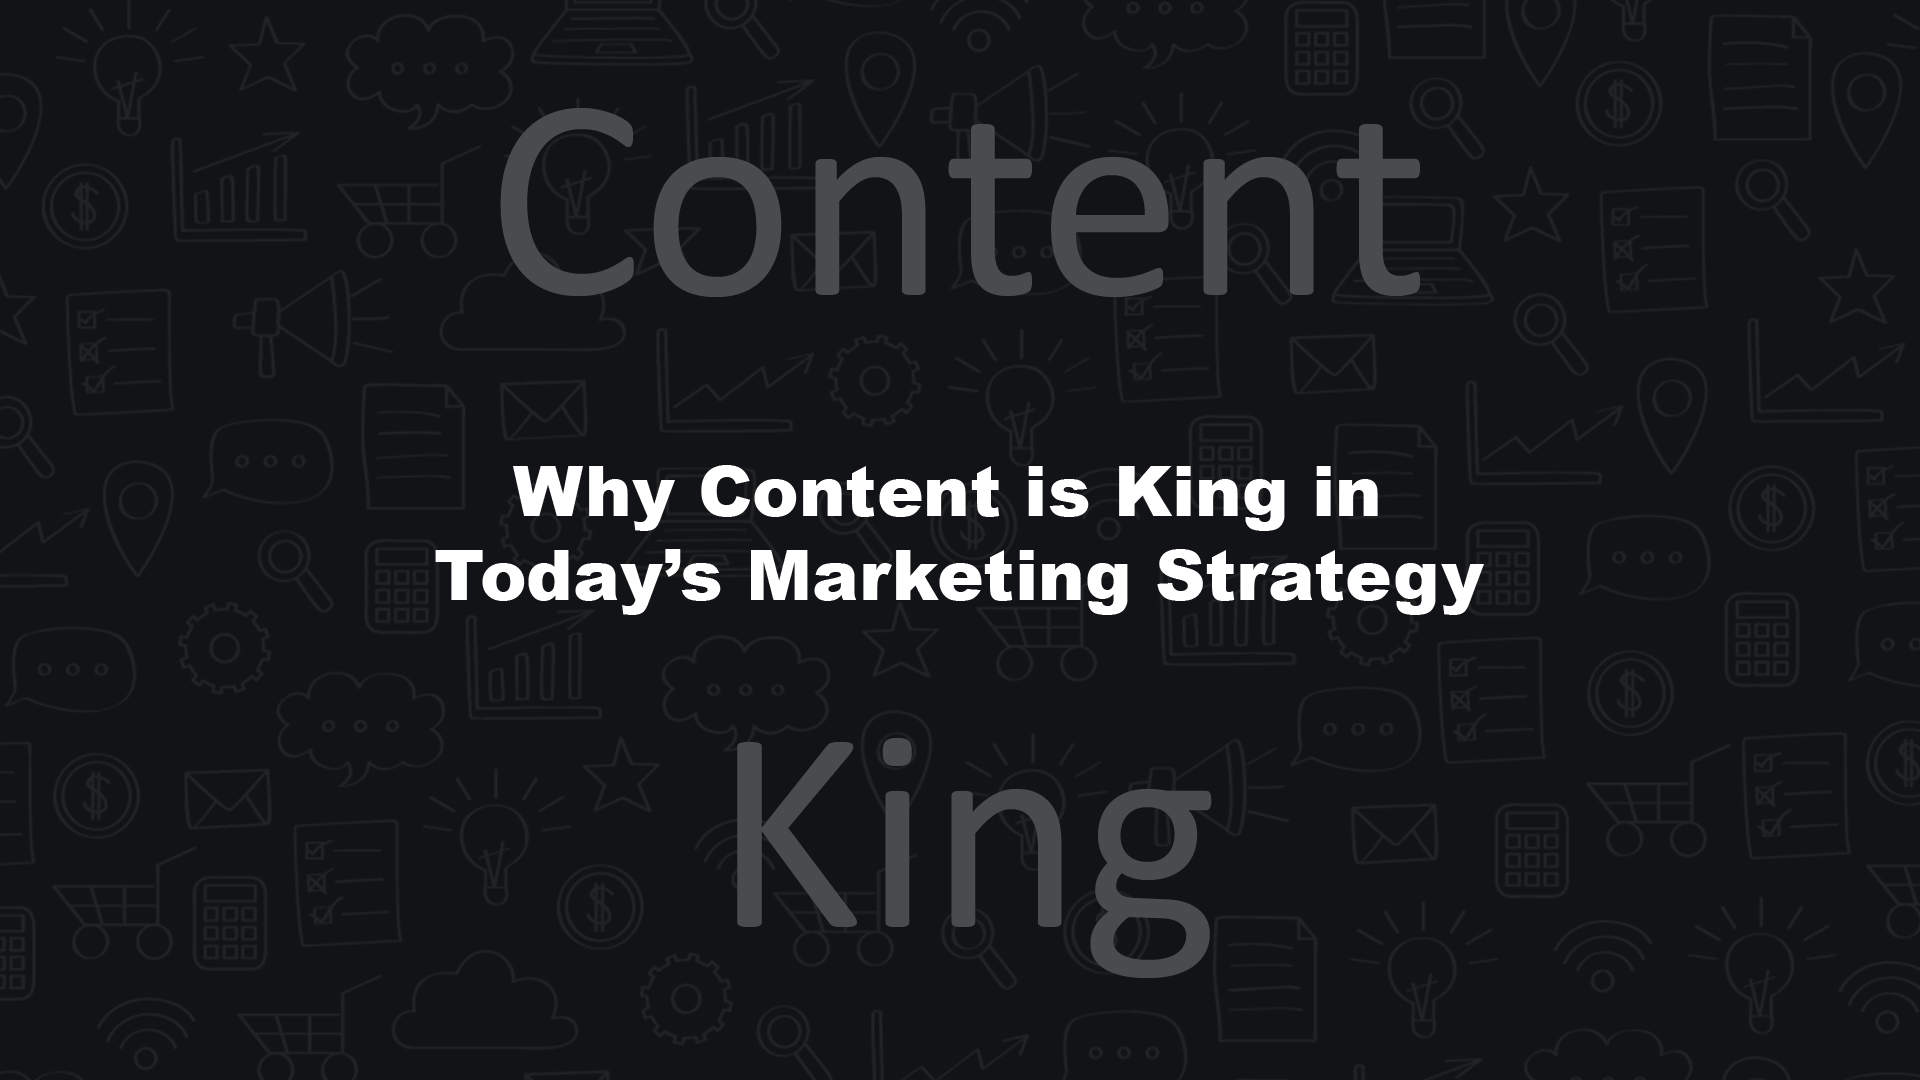 Content is King in Today’s Marketing Strategy